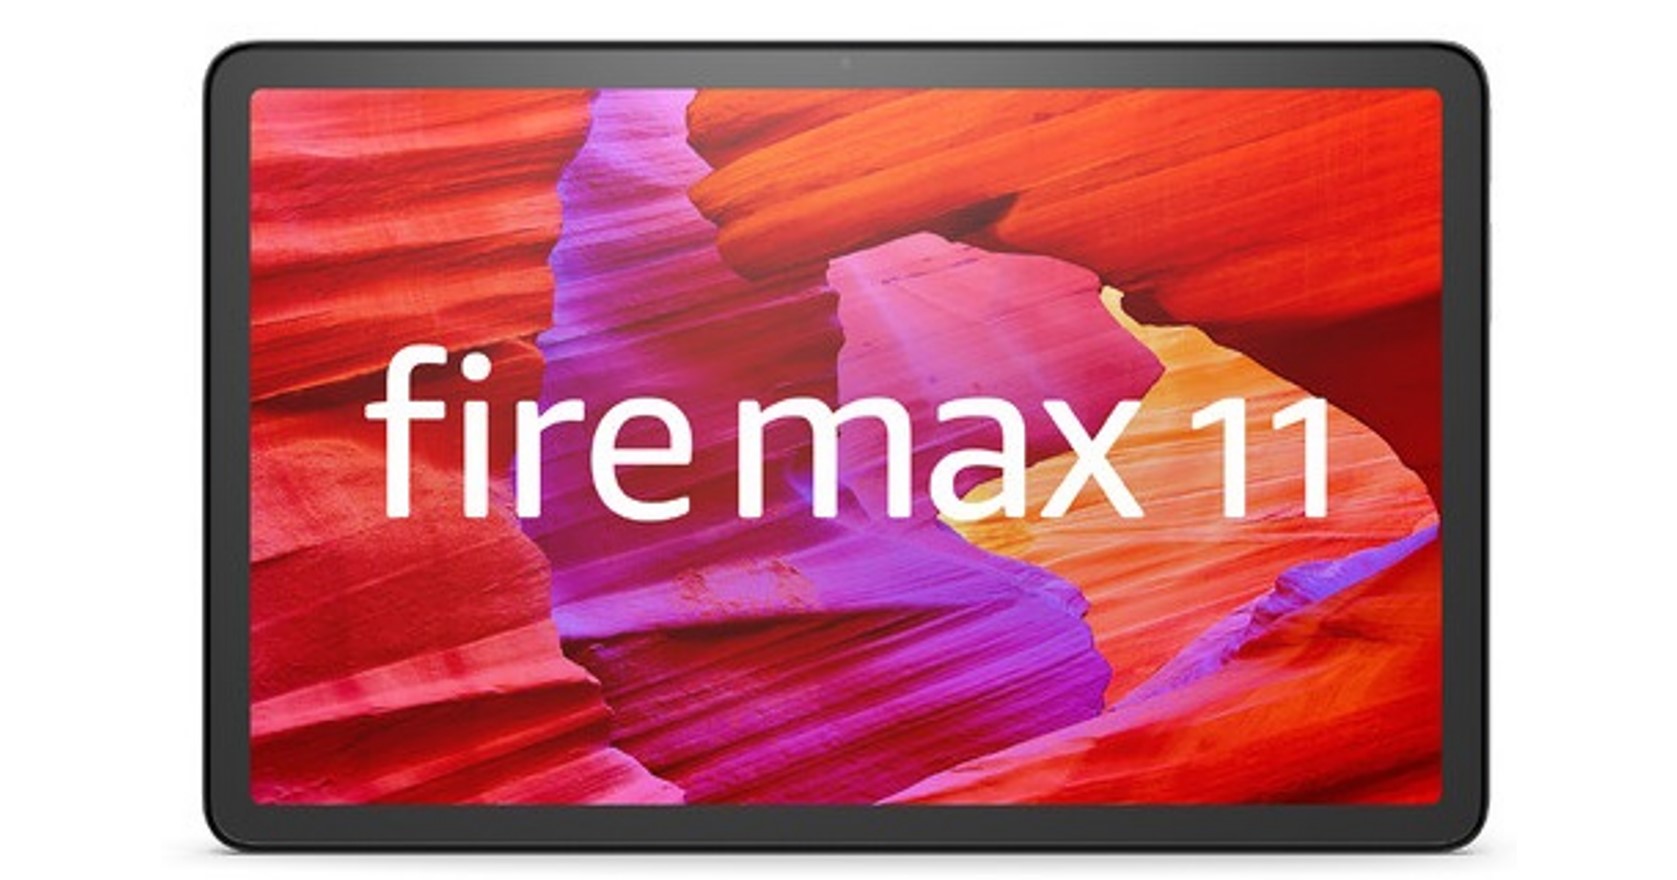 Amazon、Fireタブレットシリーズの最新モデル「Fire Max 11」を発表